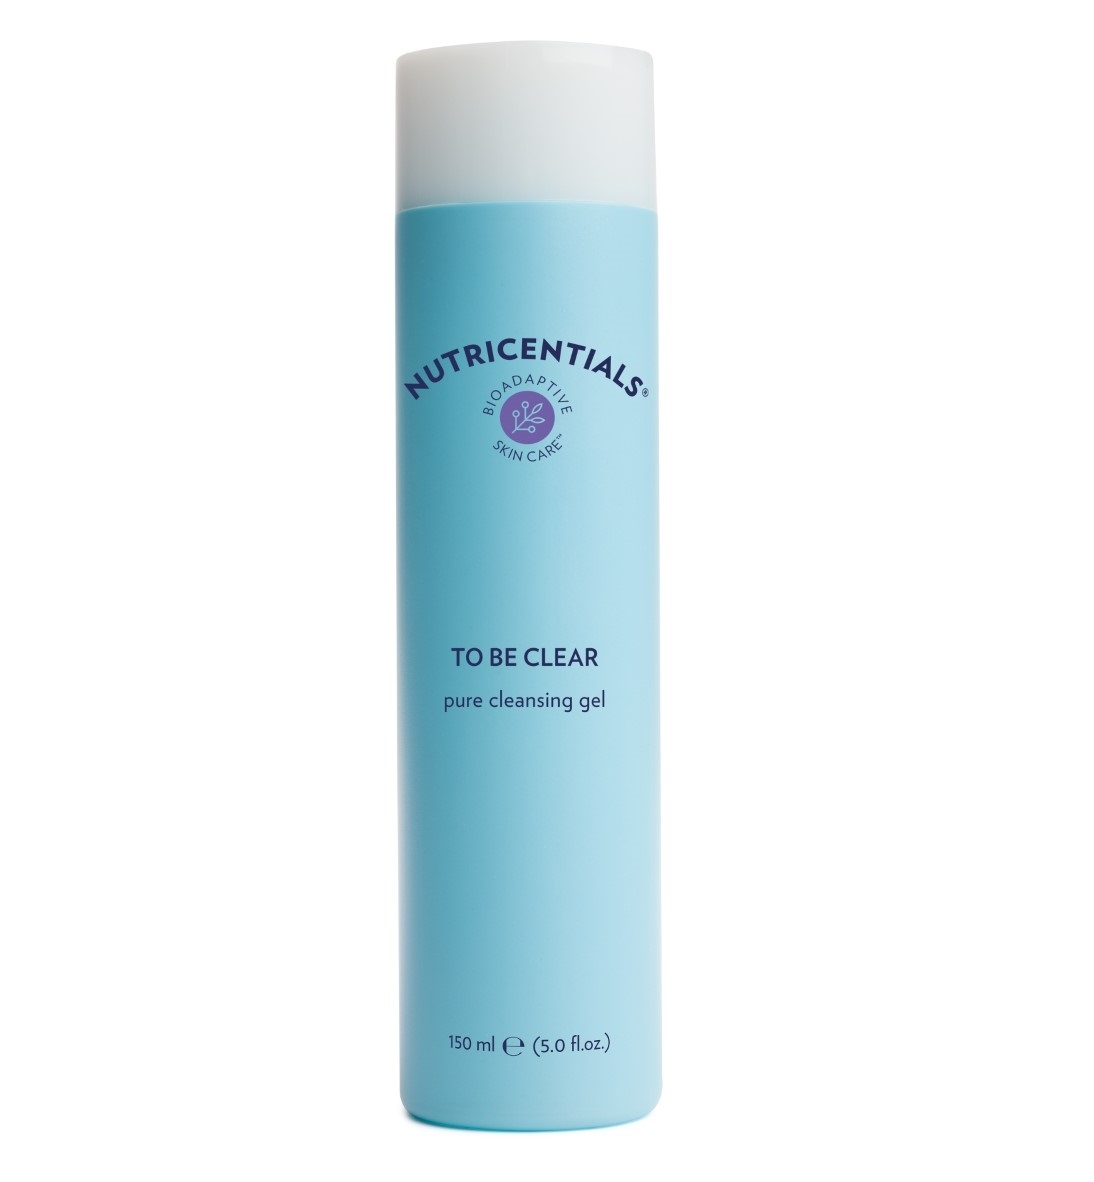 Nu Skin Nutricentials To Be Clear Pure Cleansing Gel 150 ml